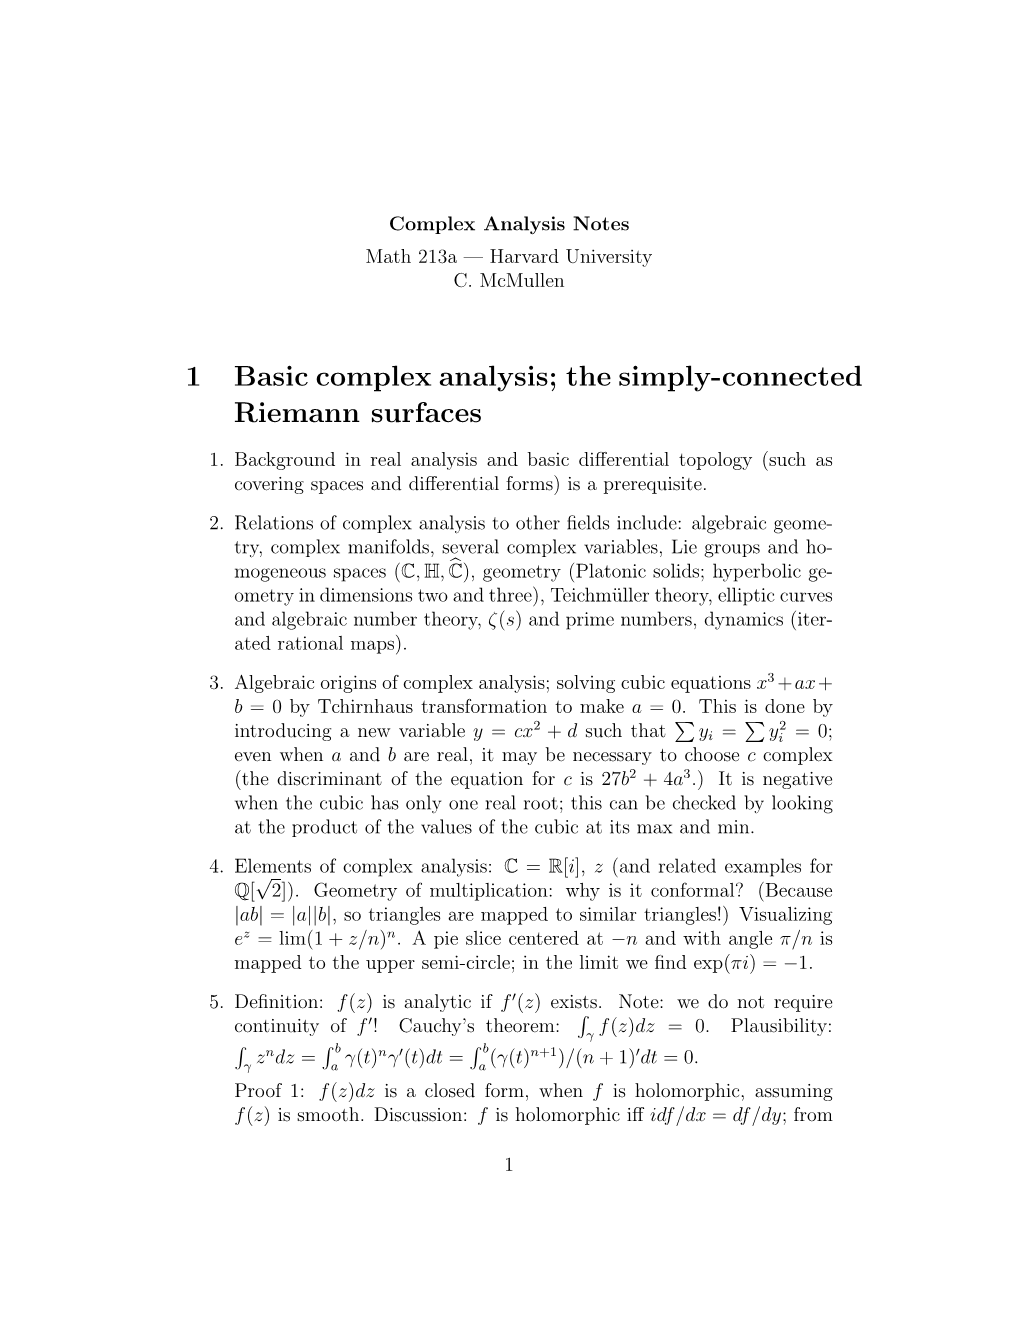 1 Basic Complex Analysis; the Simply-Connected Riemann Surfaces